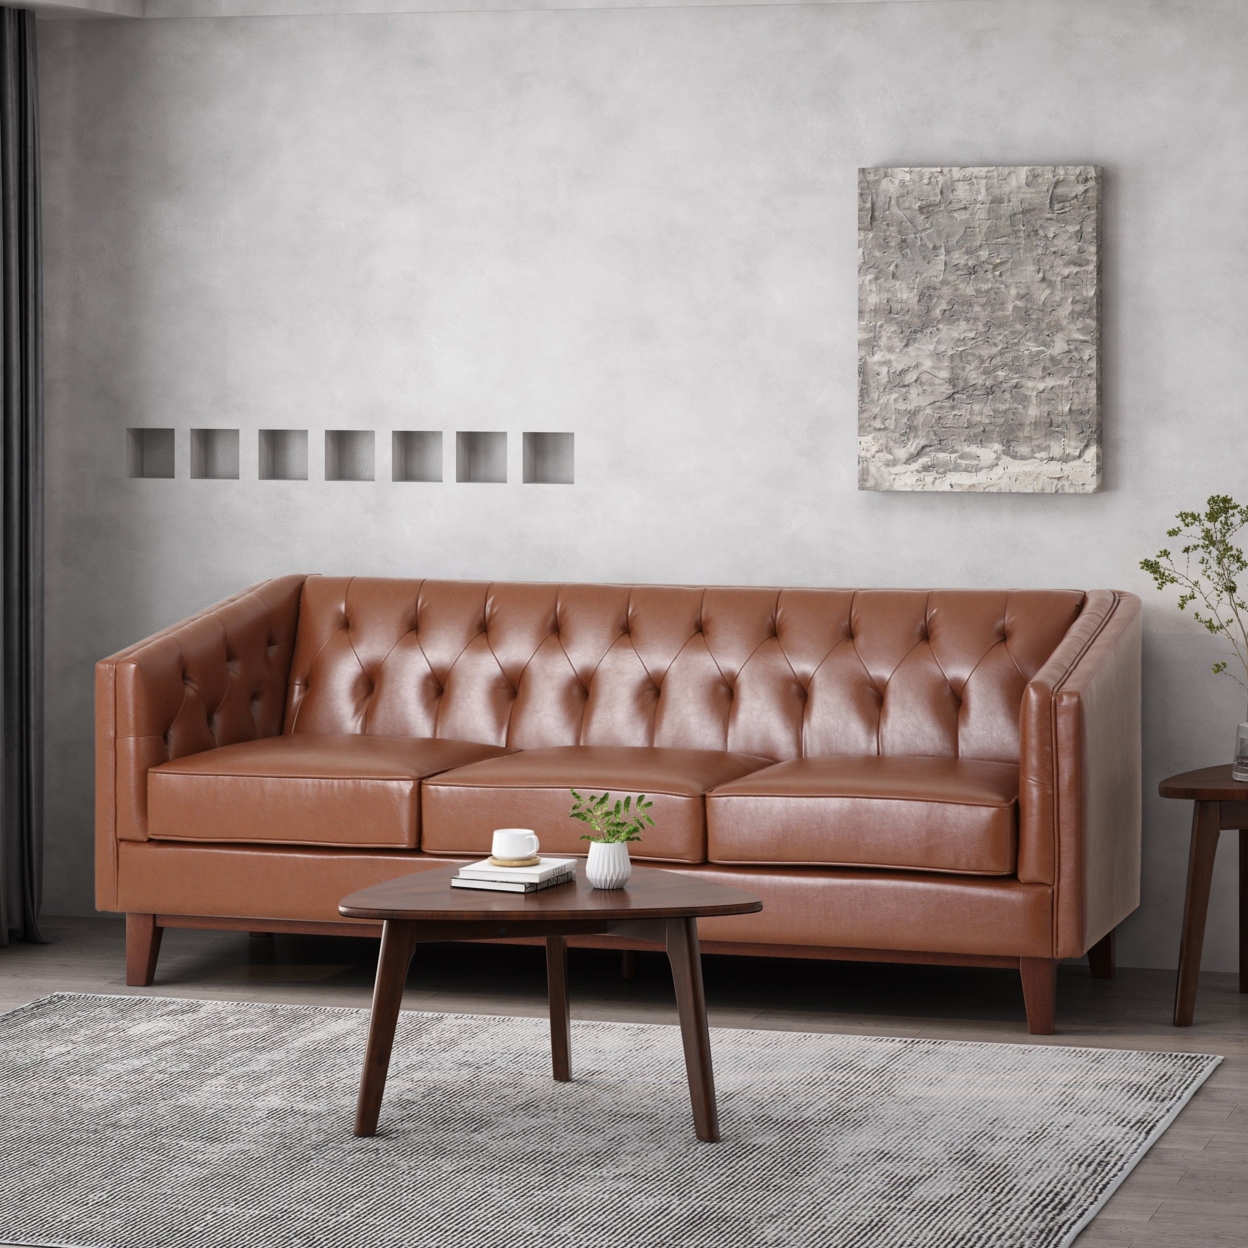 Colstrip Contemporary Upholstered 3 Seater Sofa - Cognac